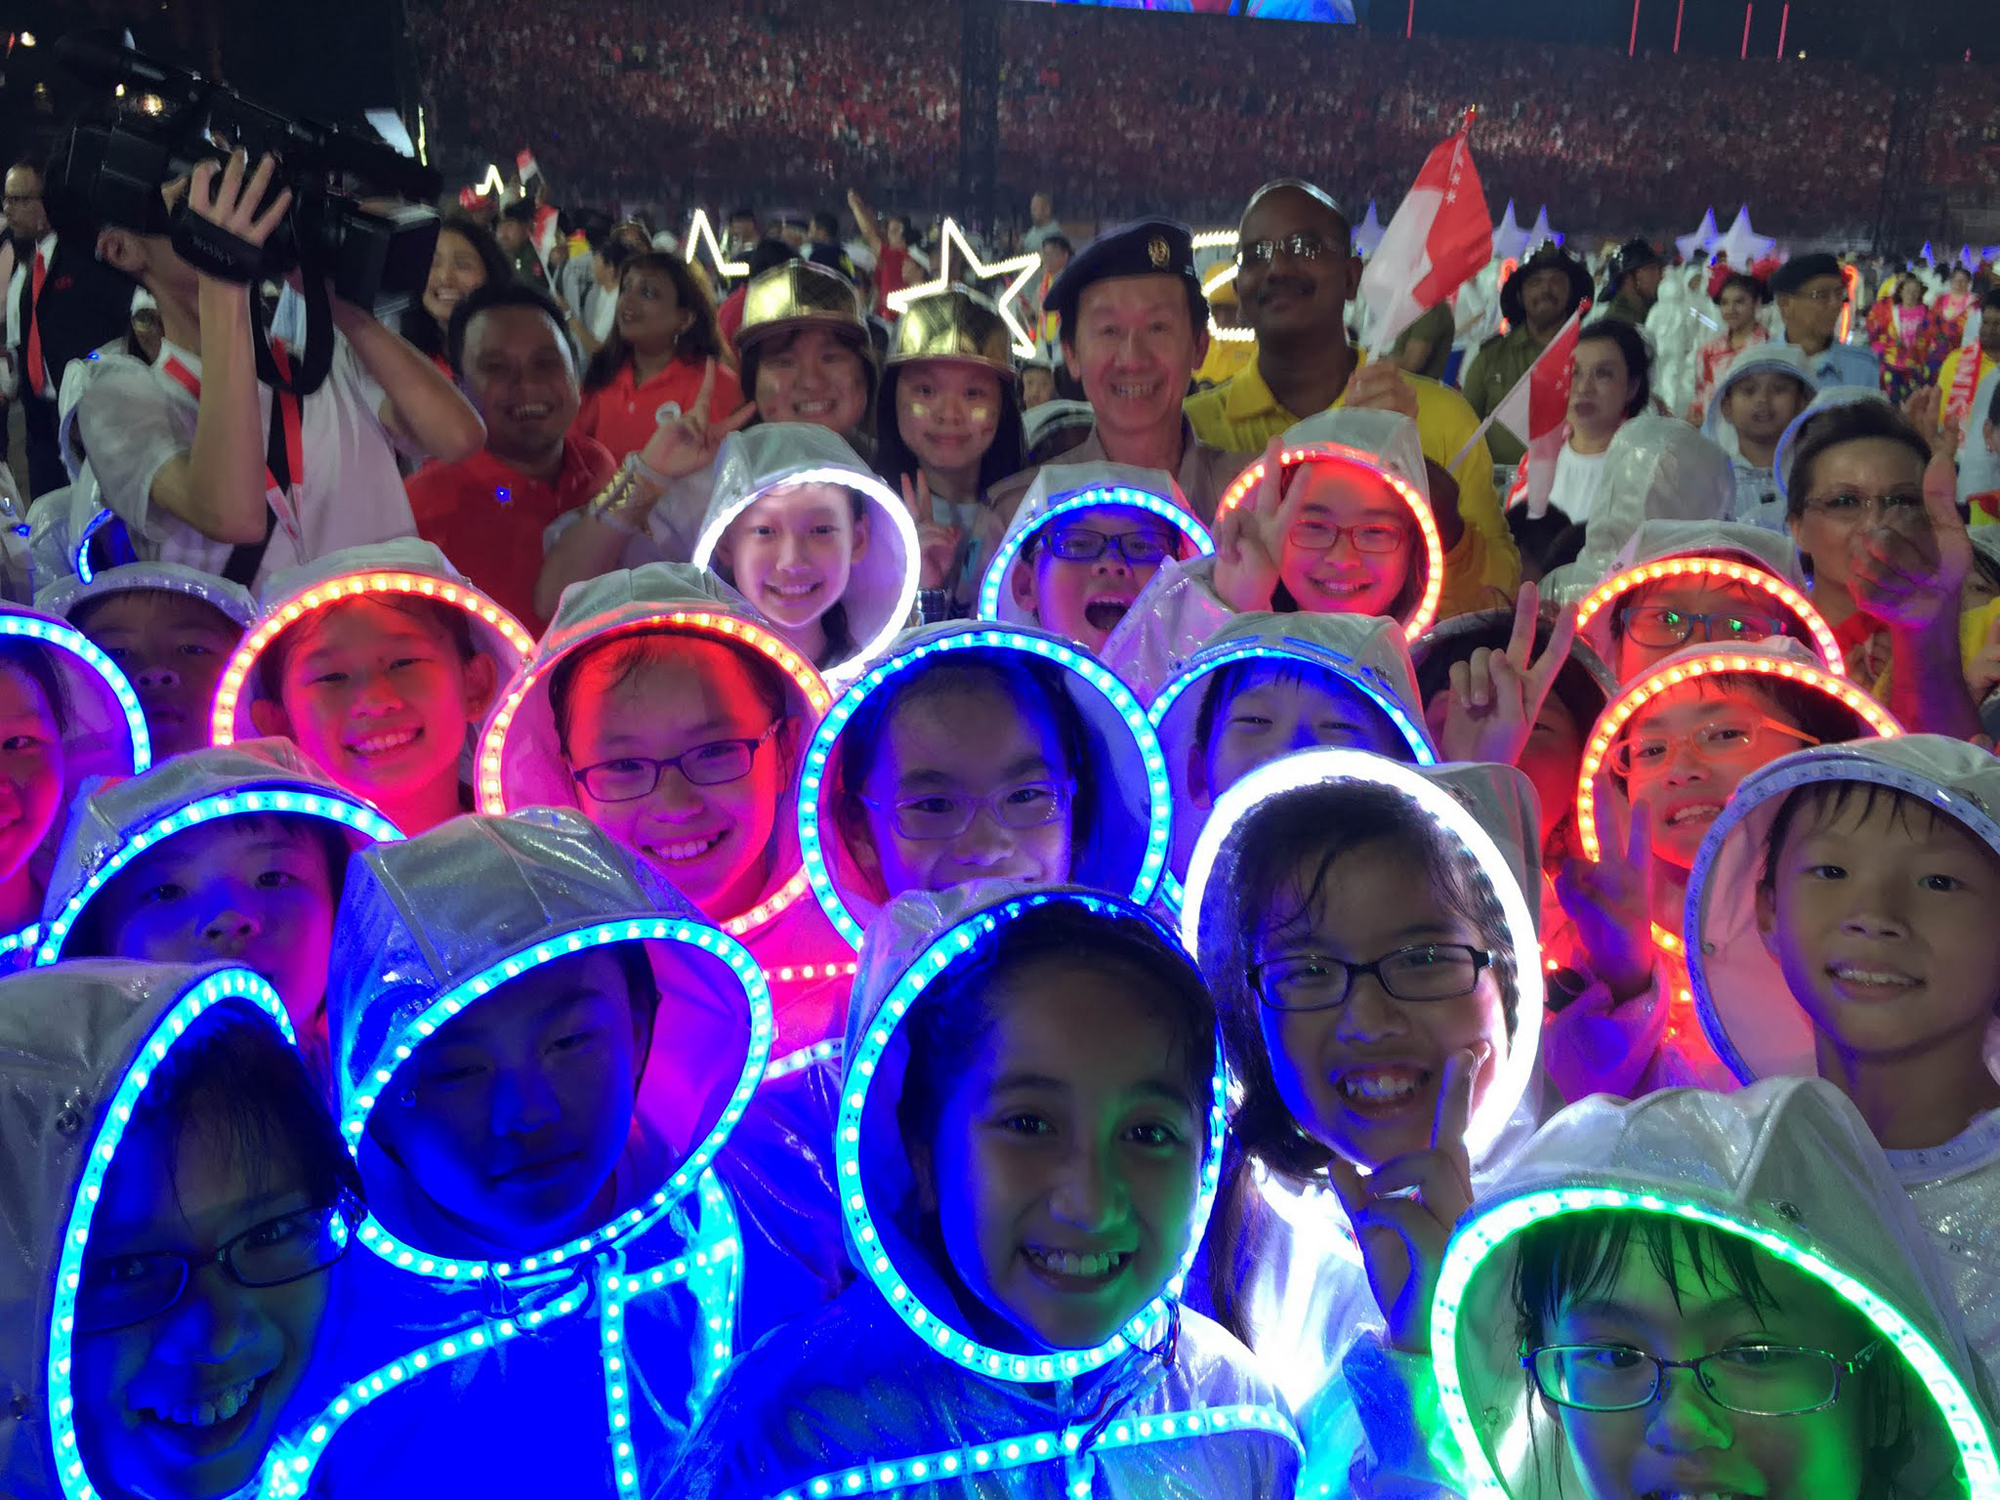 Schoolchildren at NDP2015 (Photo by PM Lee Hsien Loong)